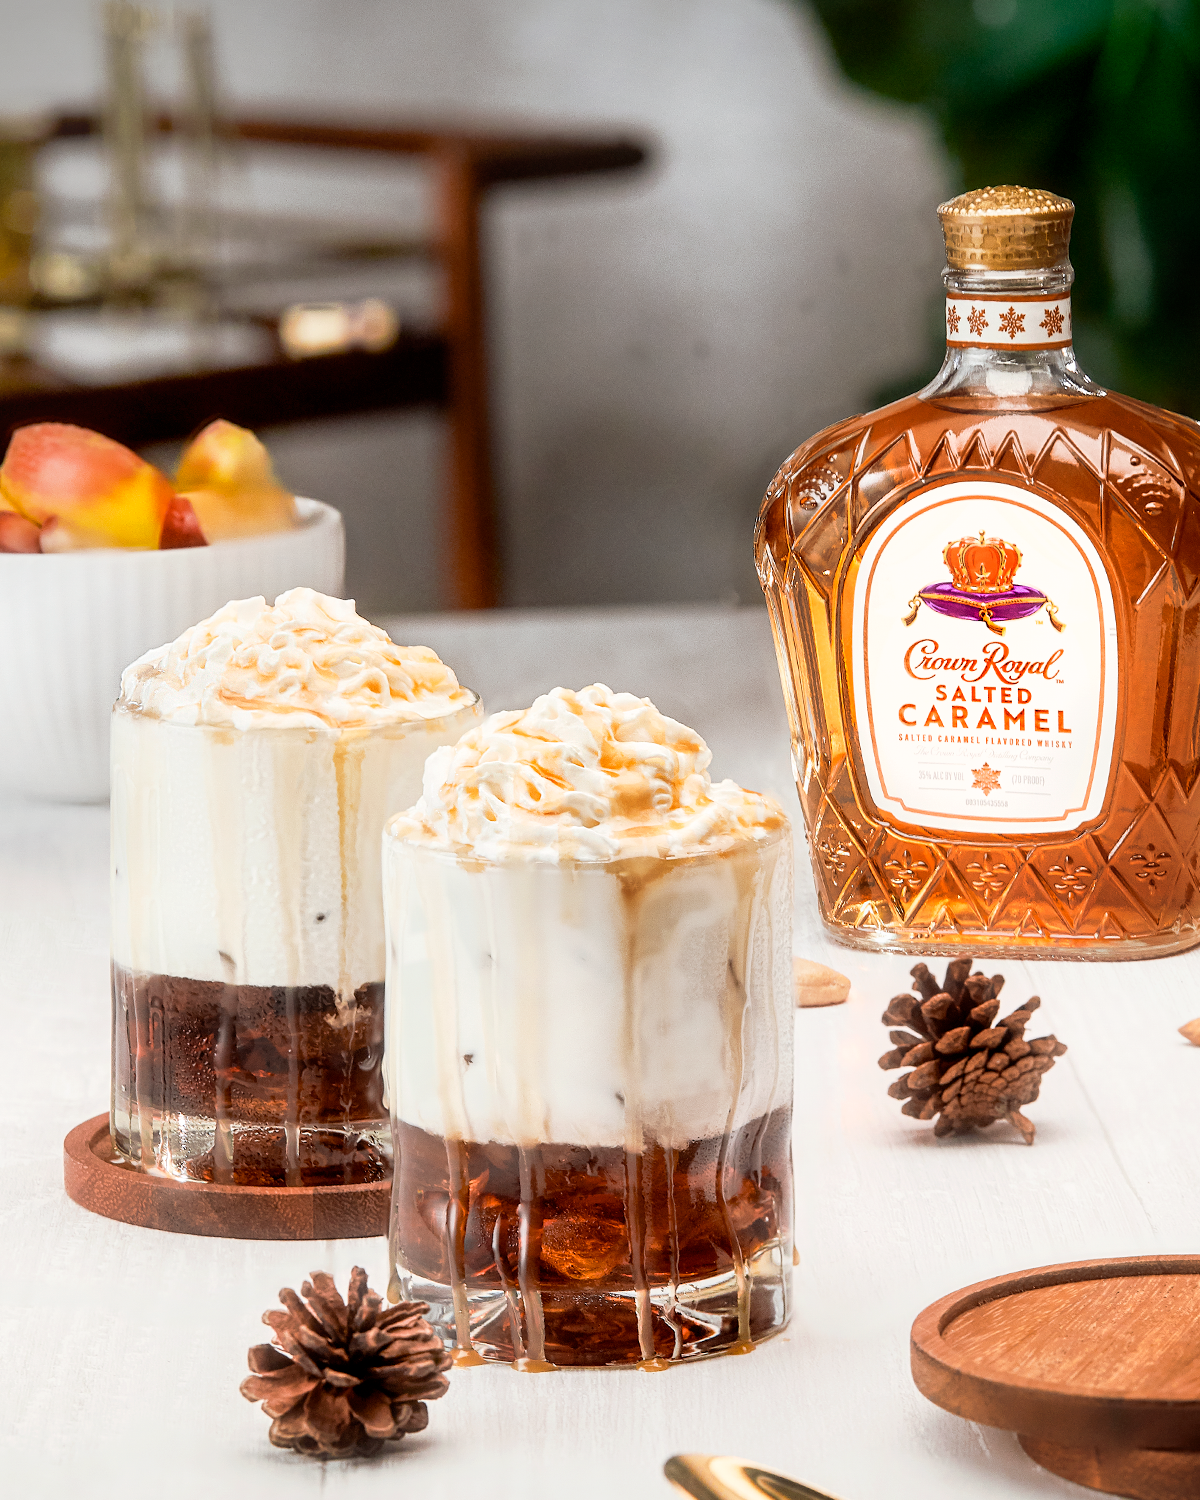 Crown Royal Salted Caramel White Russian Whisky Cocktail